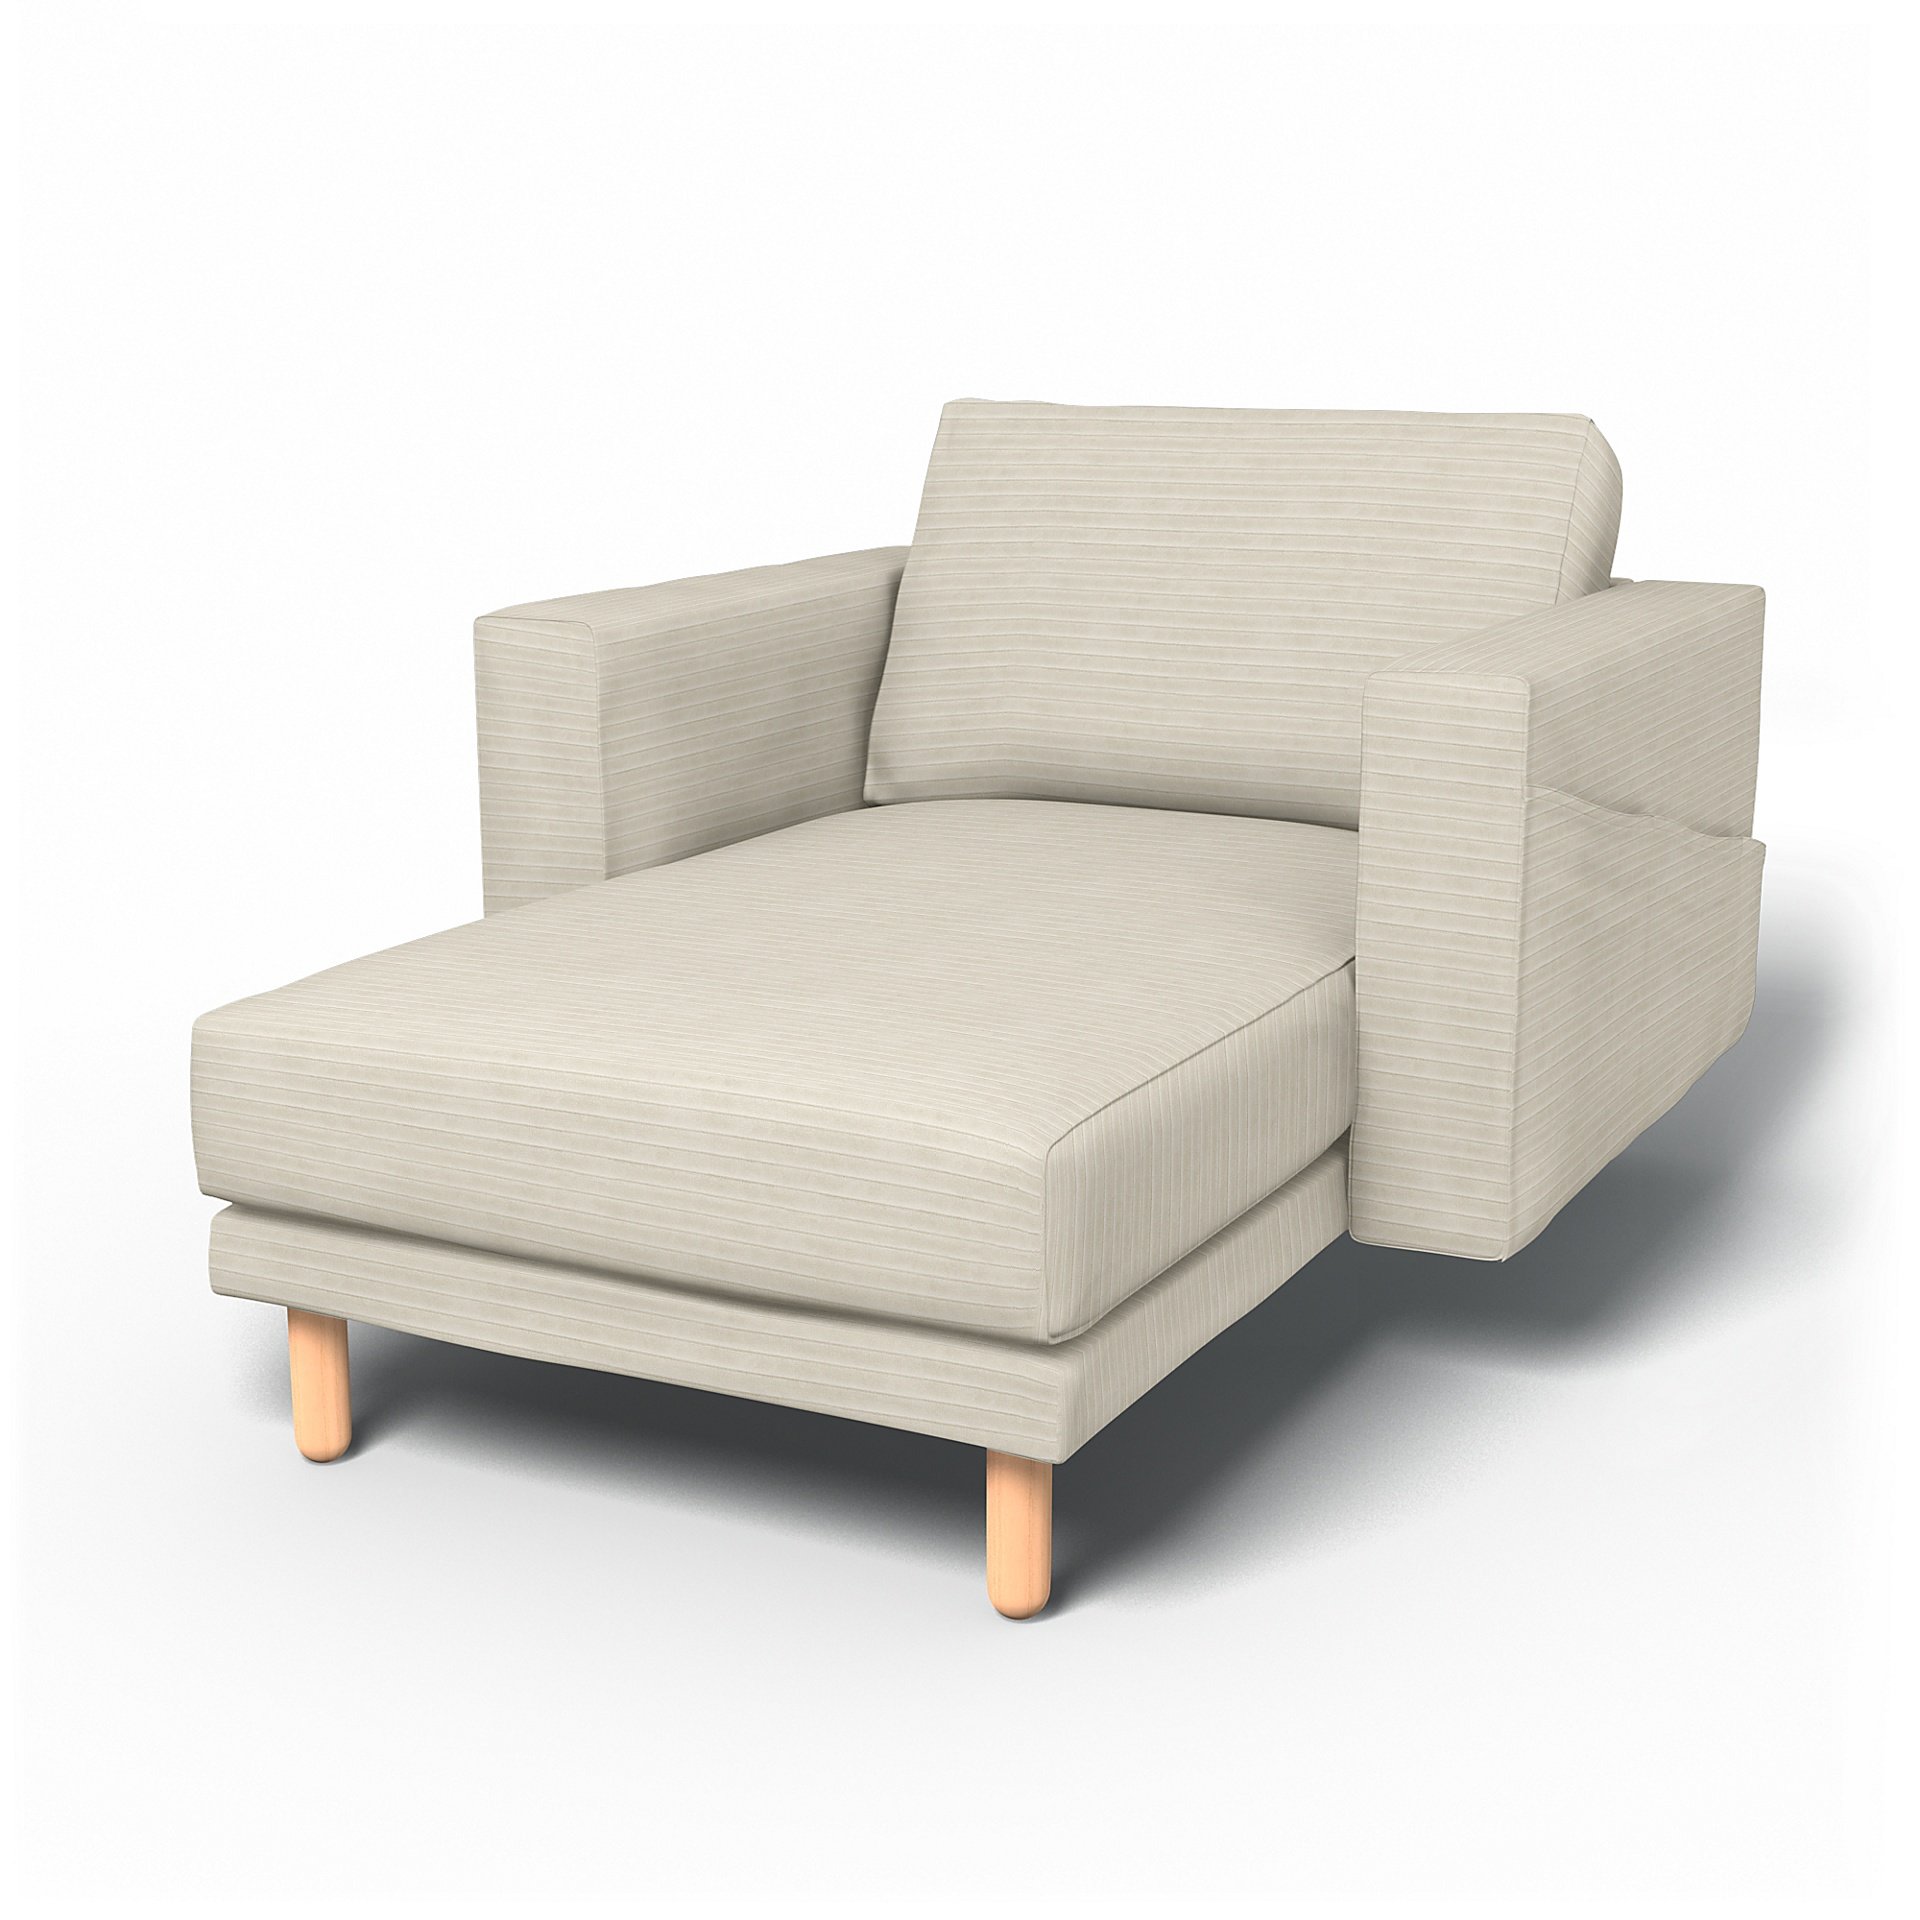 IKEA - Norsborg Stand Alone Chaise with Arms Cover, Tofu, Corduroy - Bemz